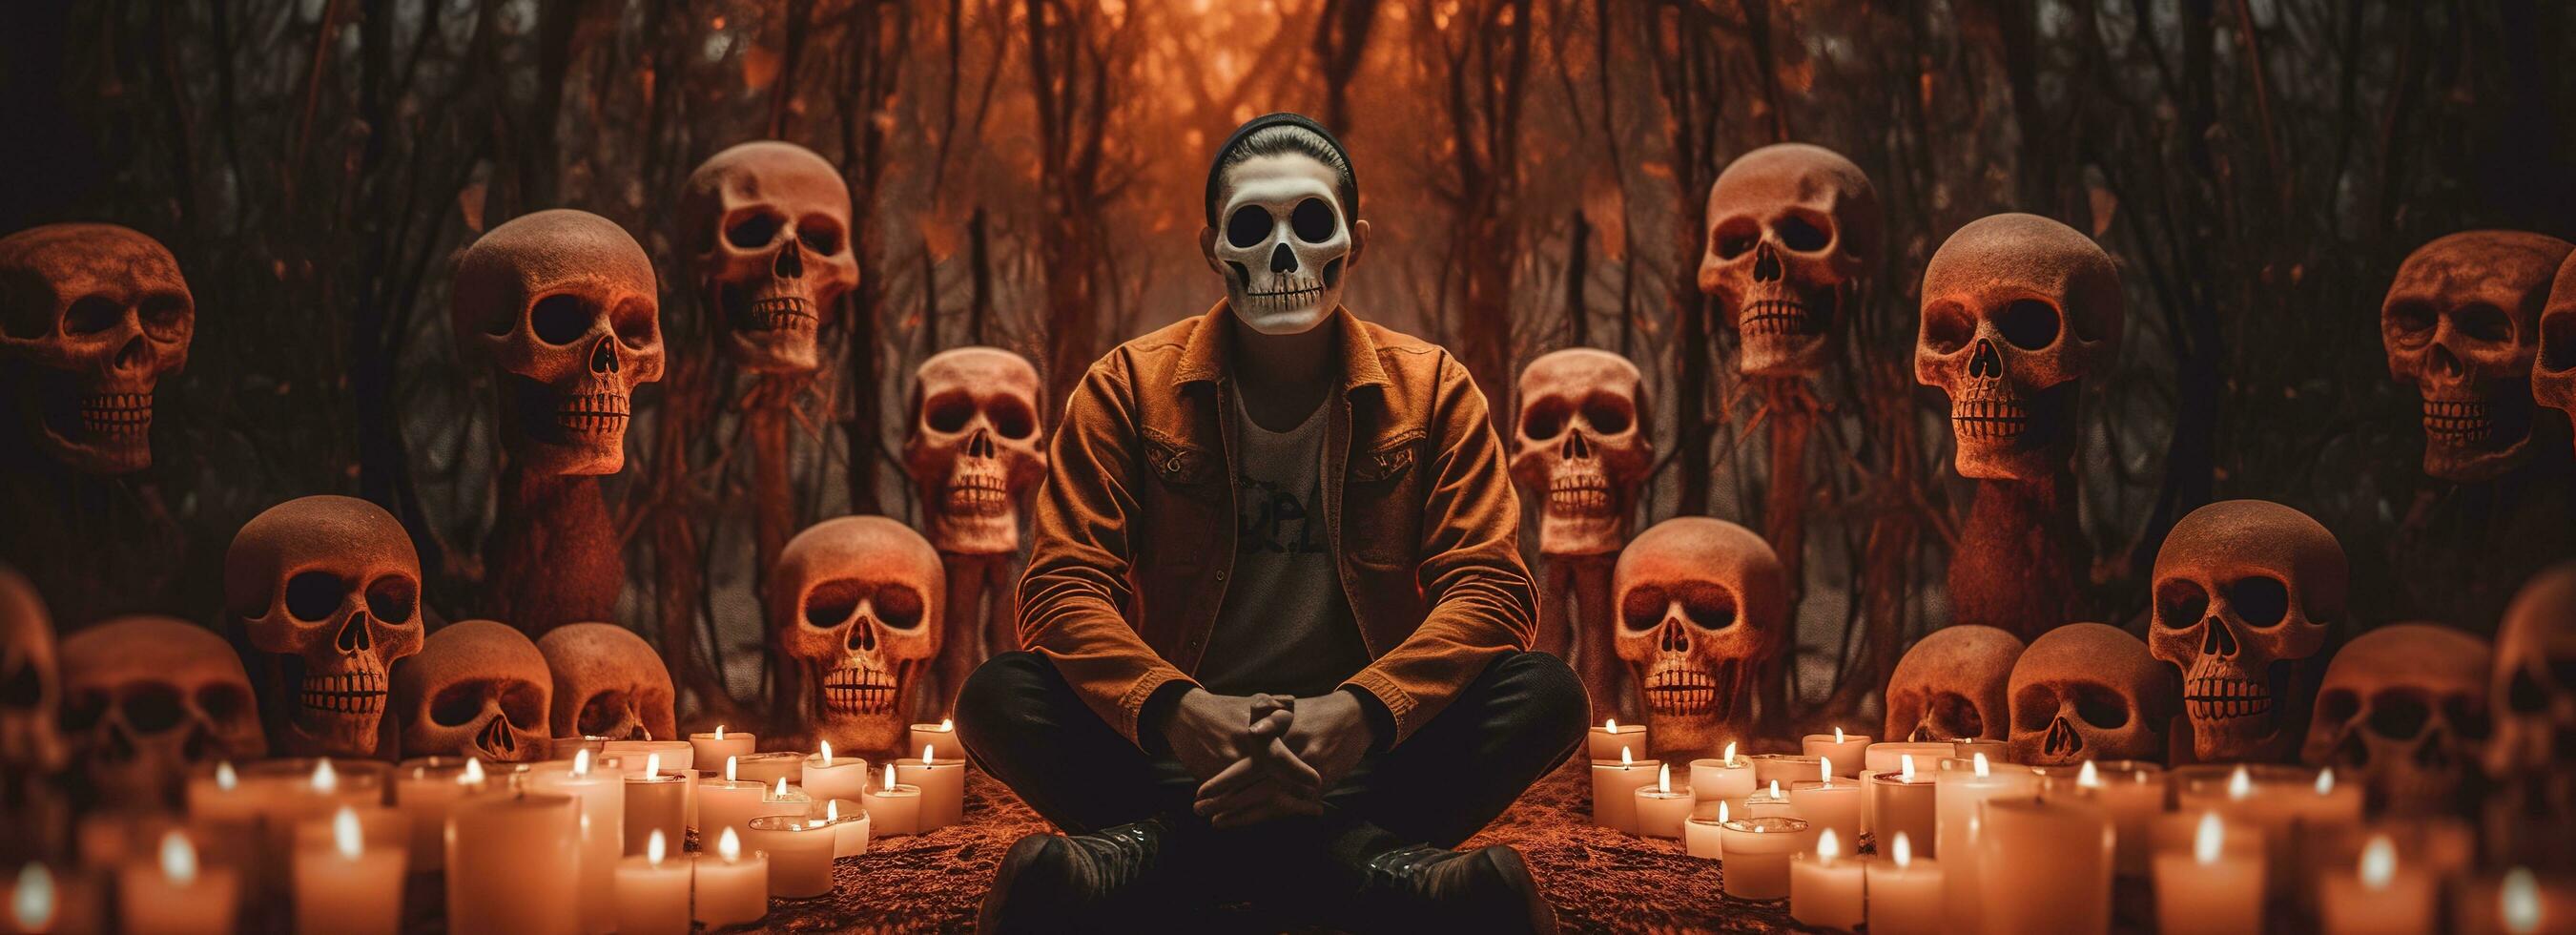 photo skull close-up with lighten candles, generate ai